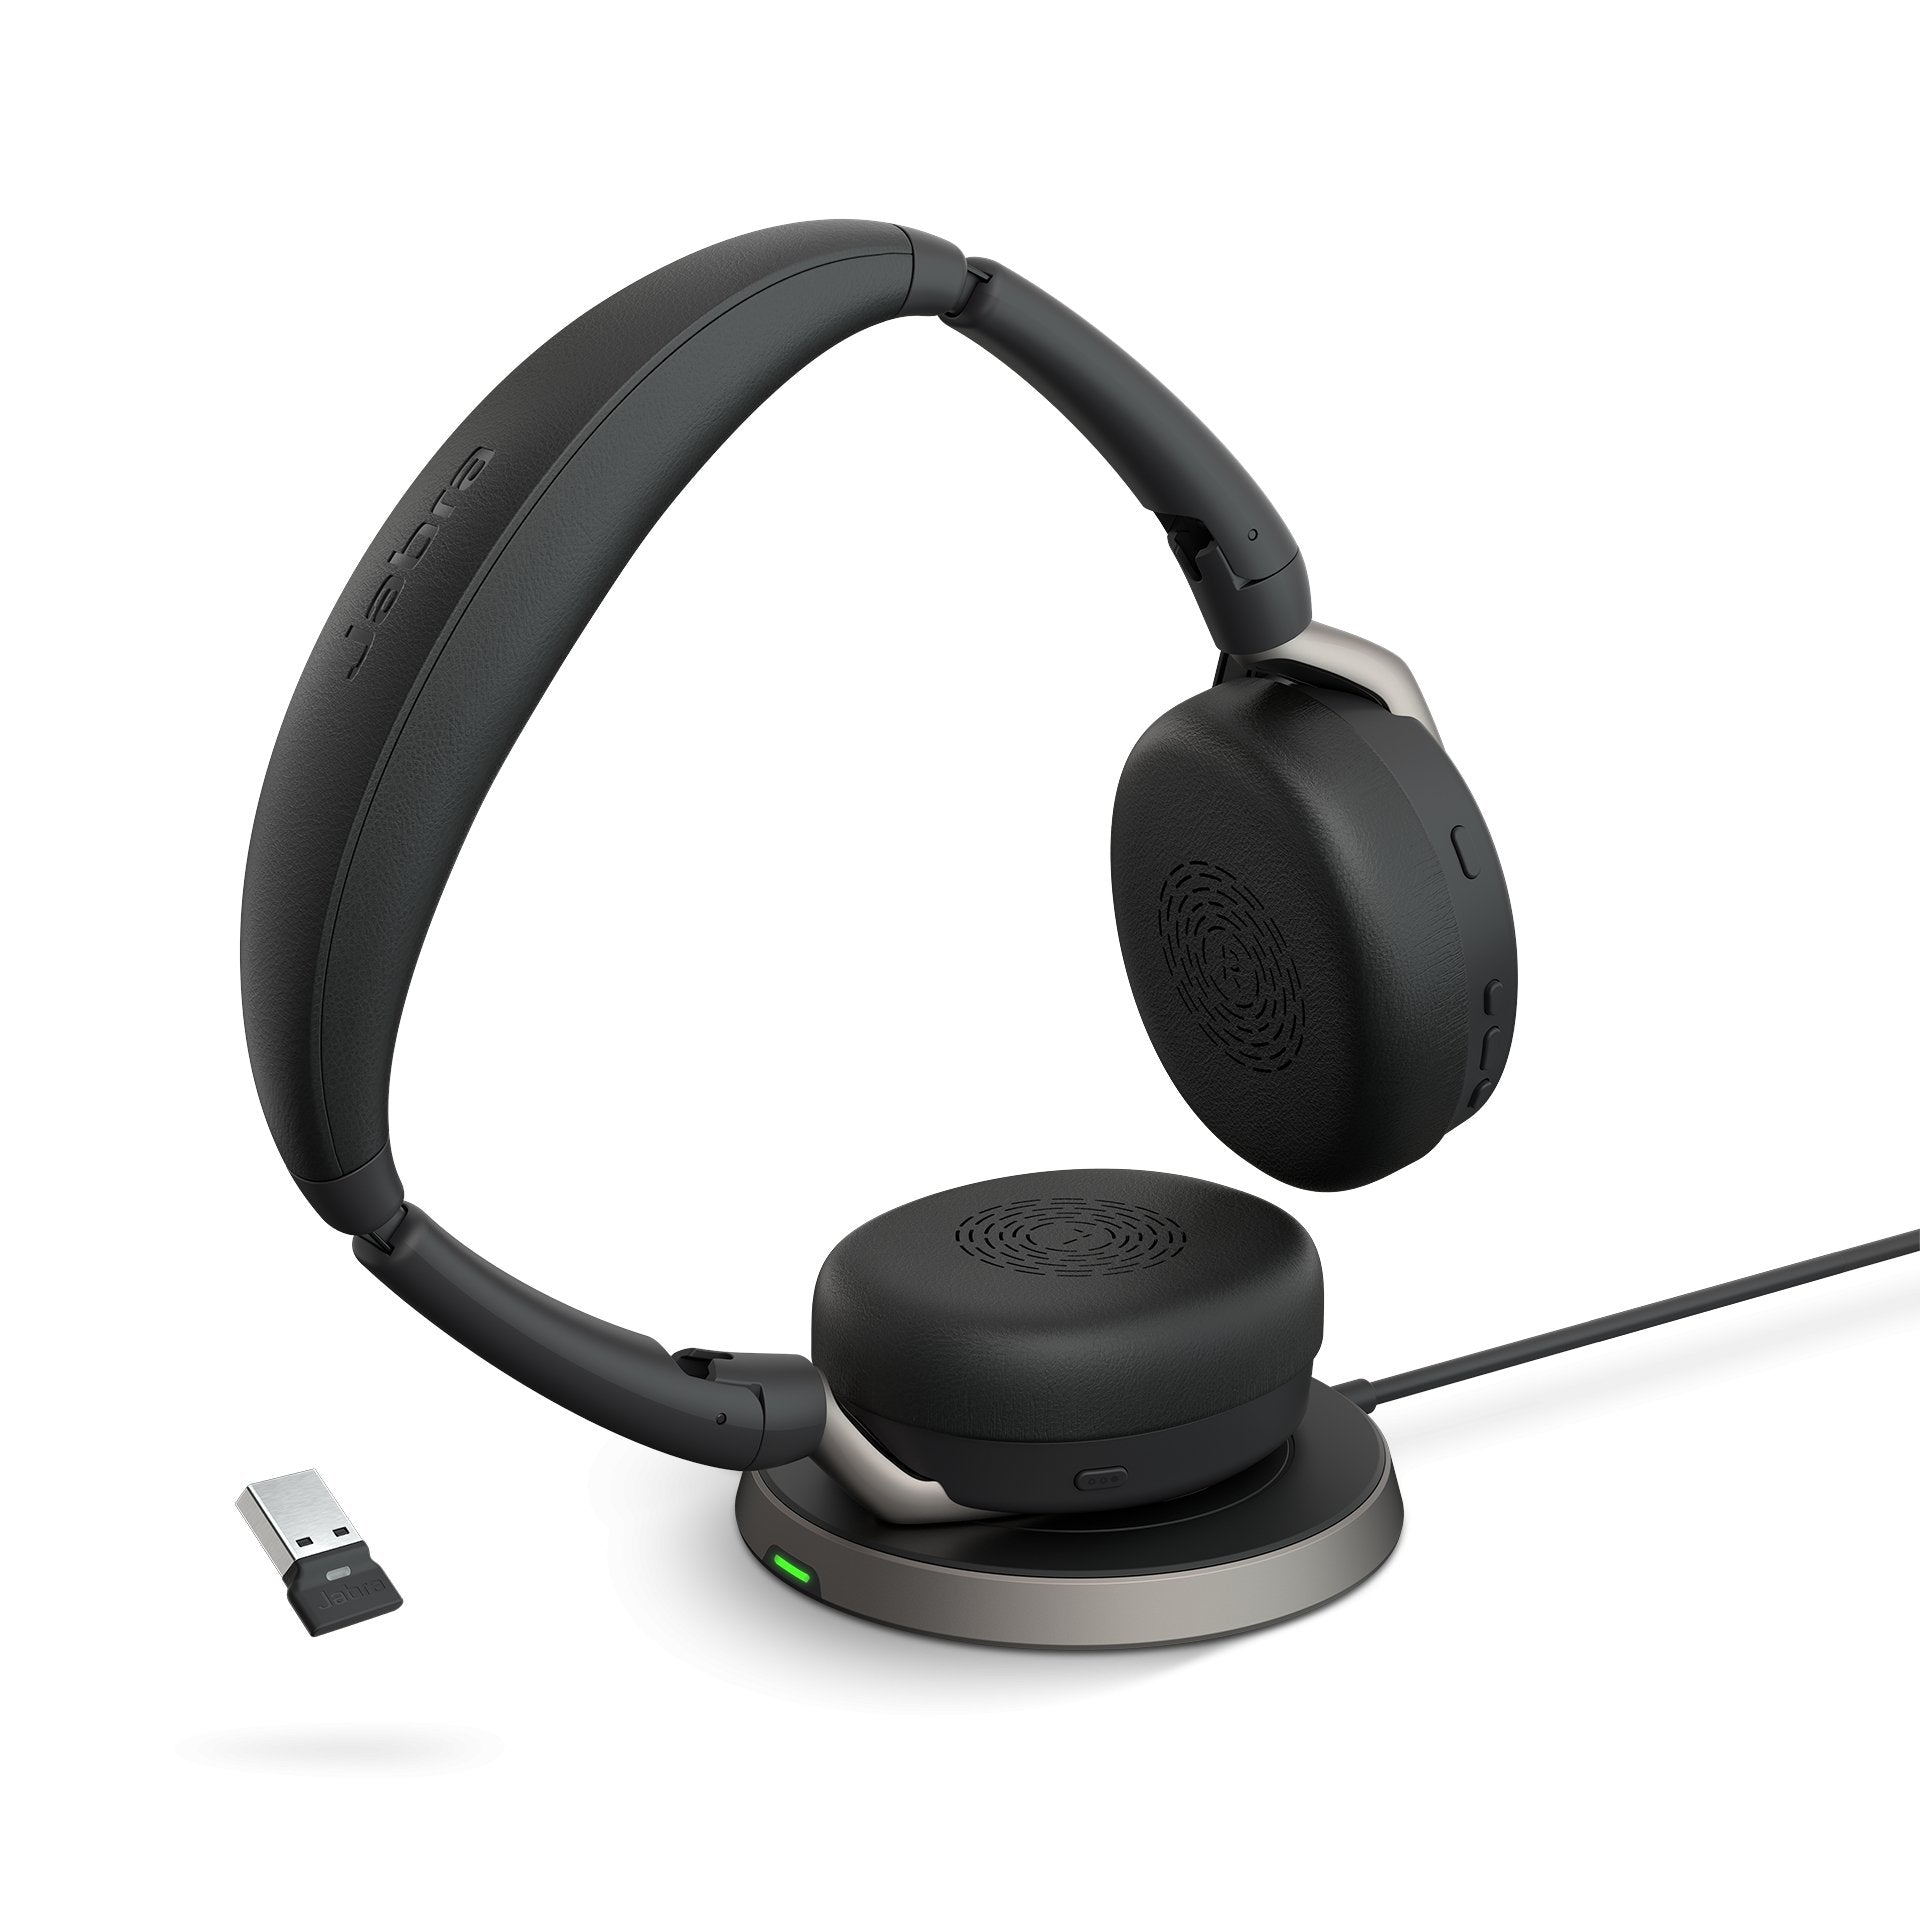 Jabra Evolve 65 Stereo UC Headset with Stand Review The Perfect